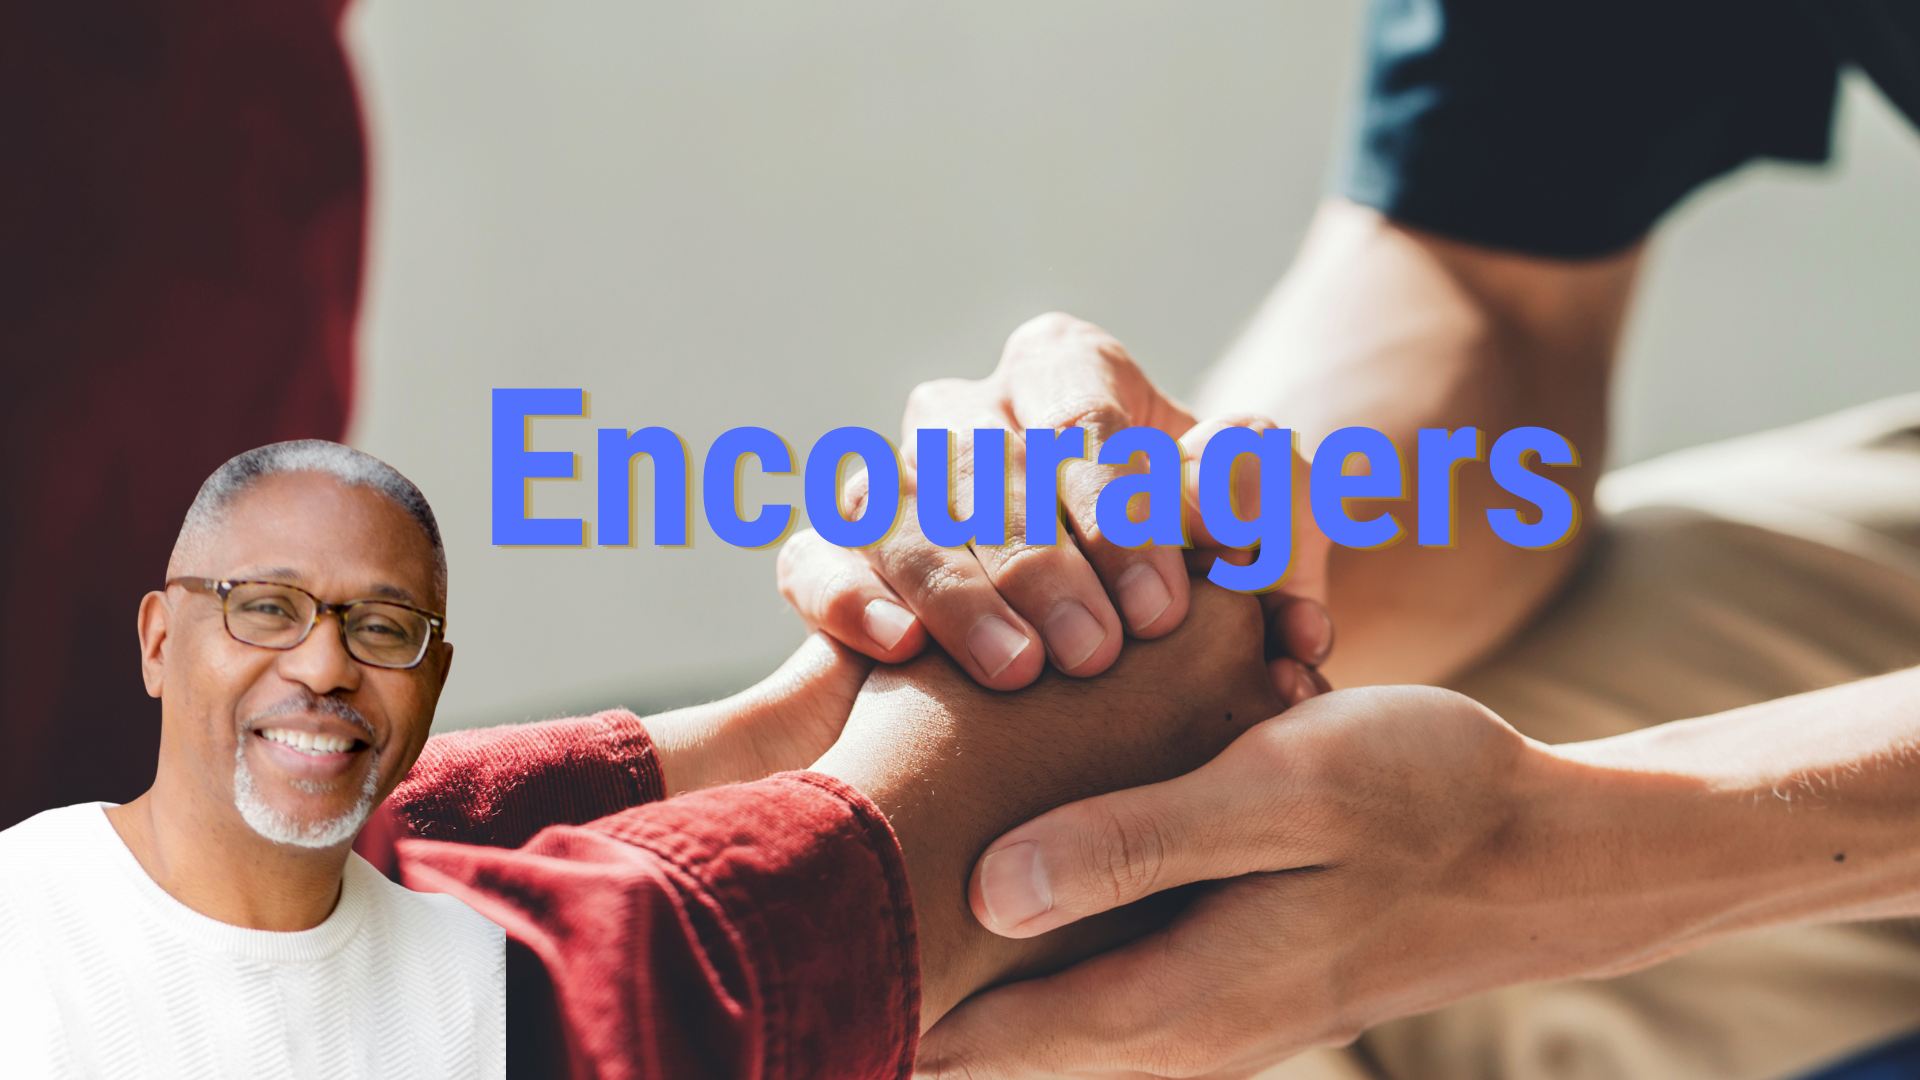 Encouragers blog featured image